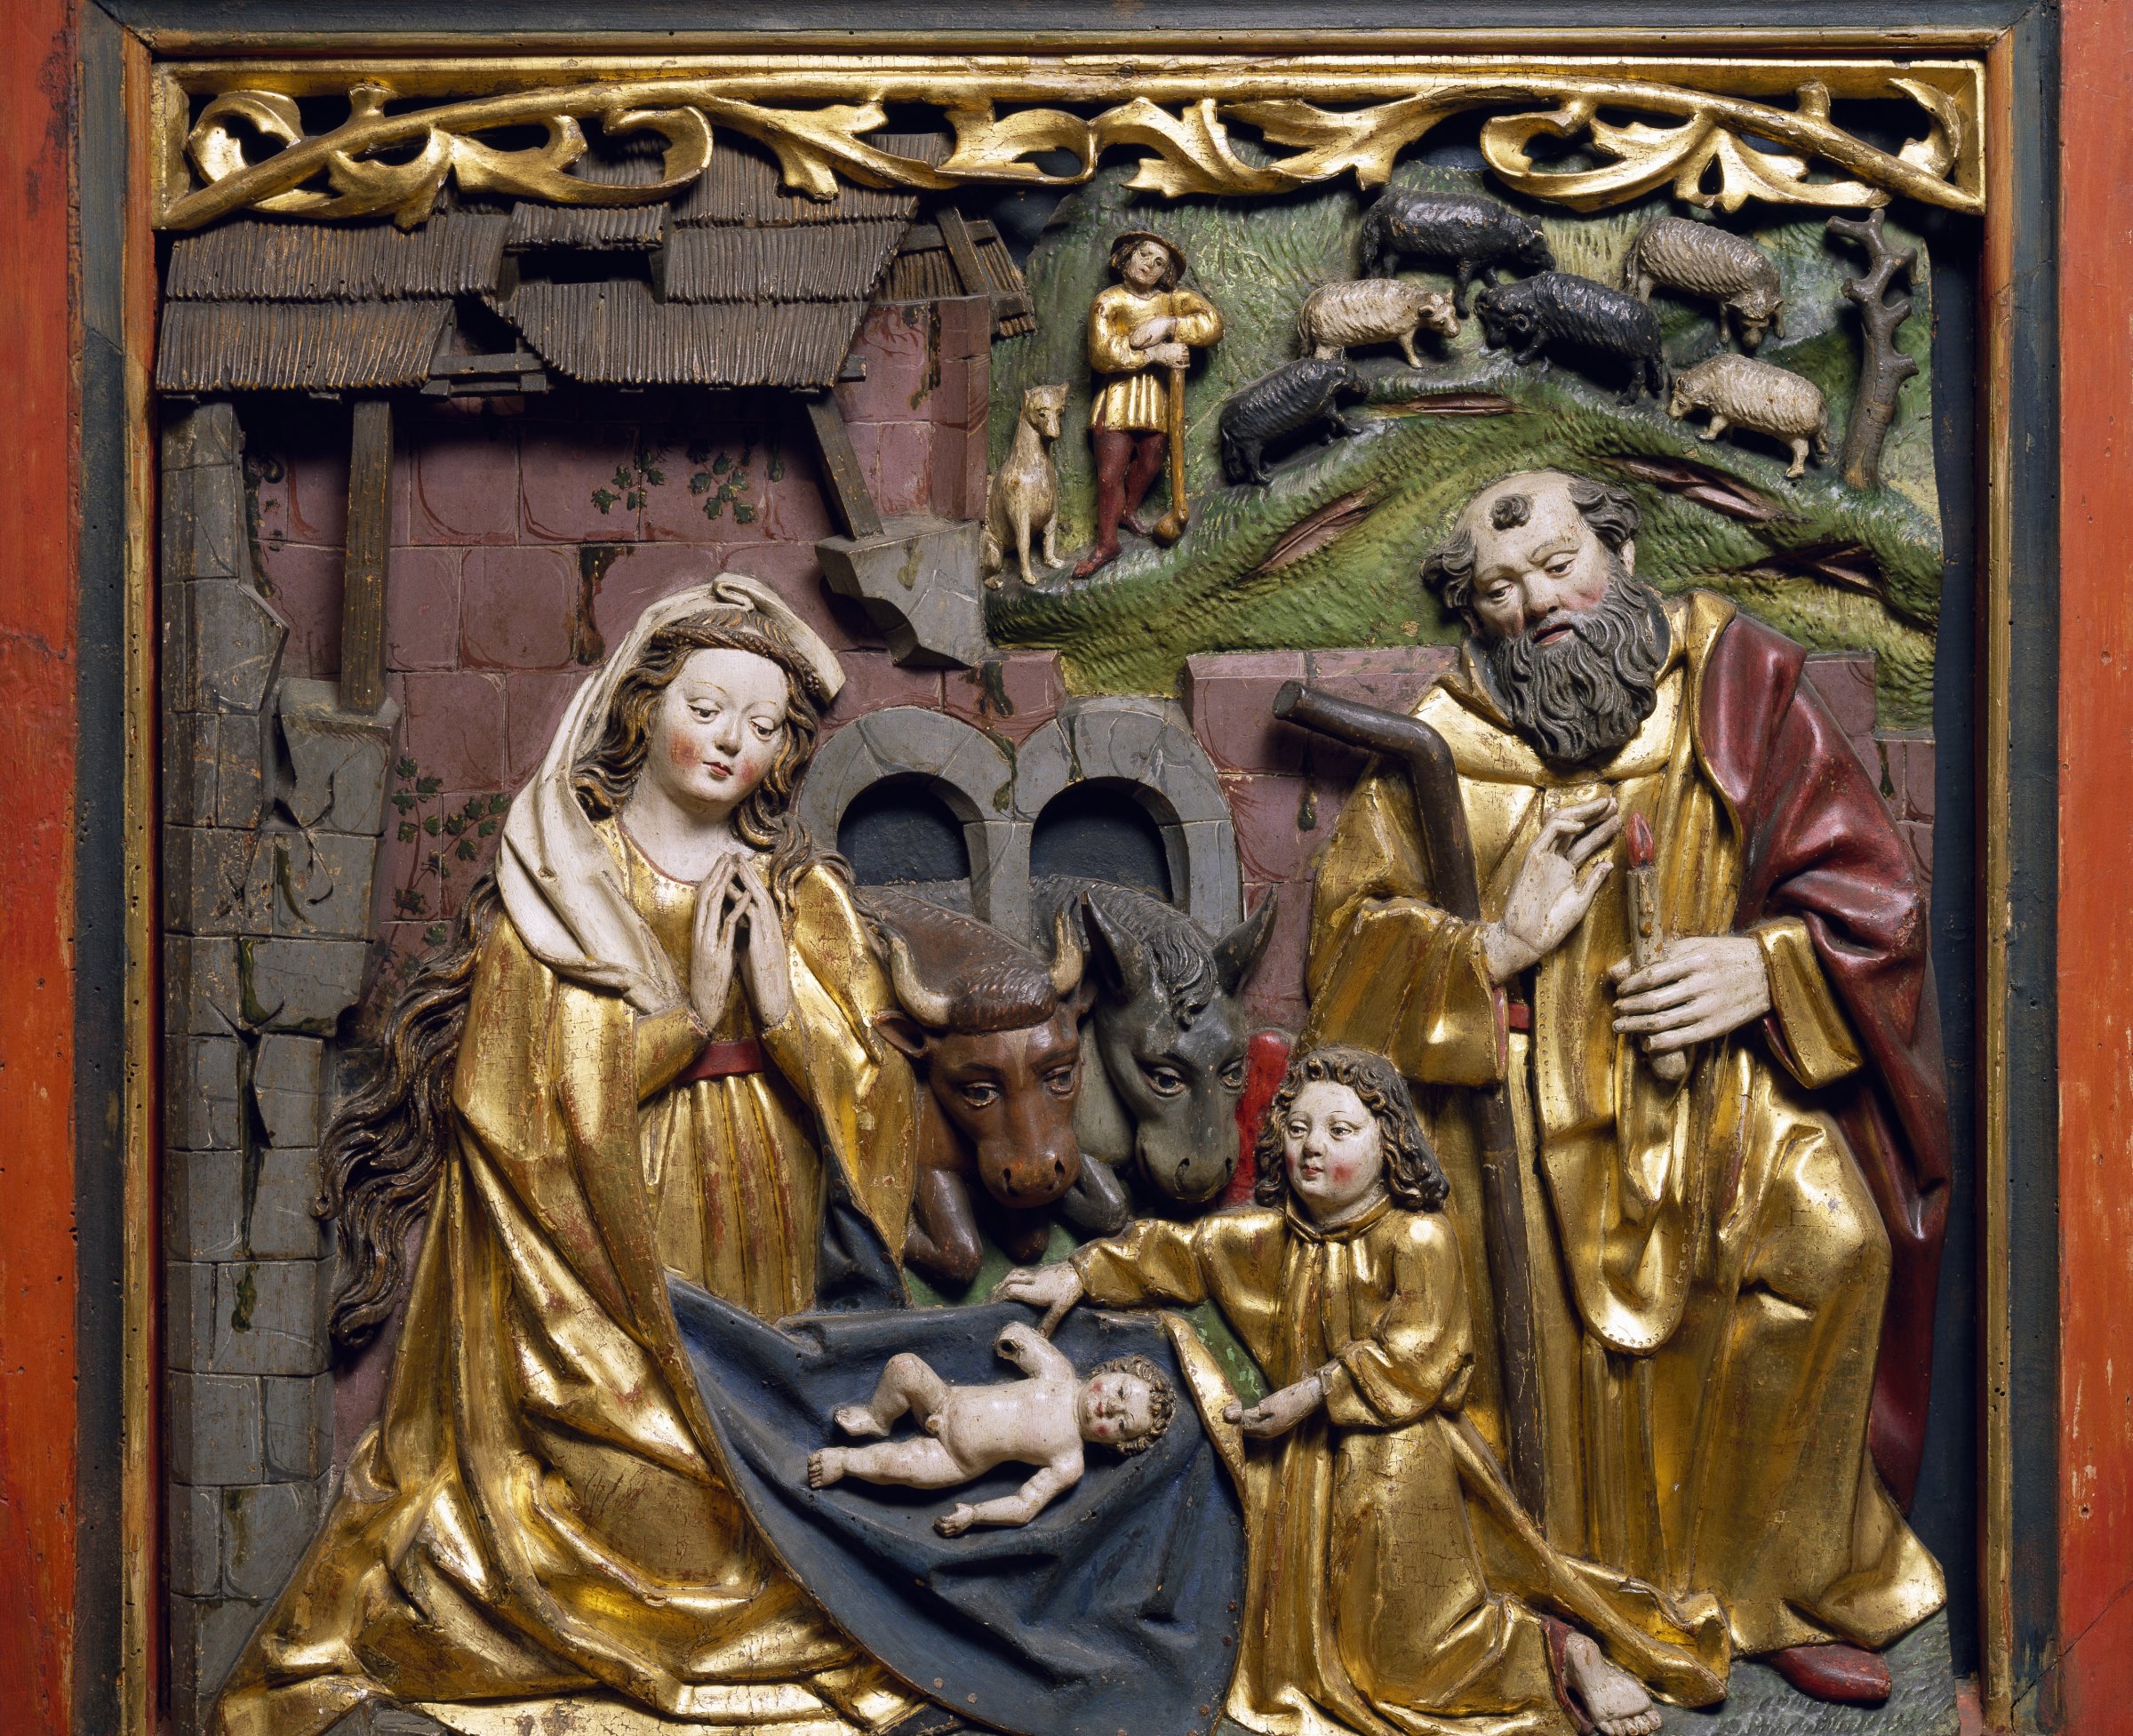 Nativity, detail from Altar of Mary, German school, polychrome wood relief, 16th century/